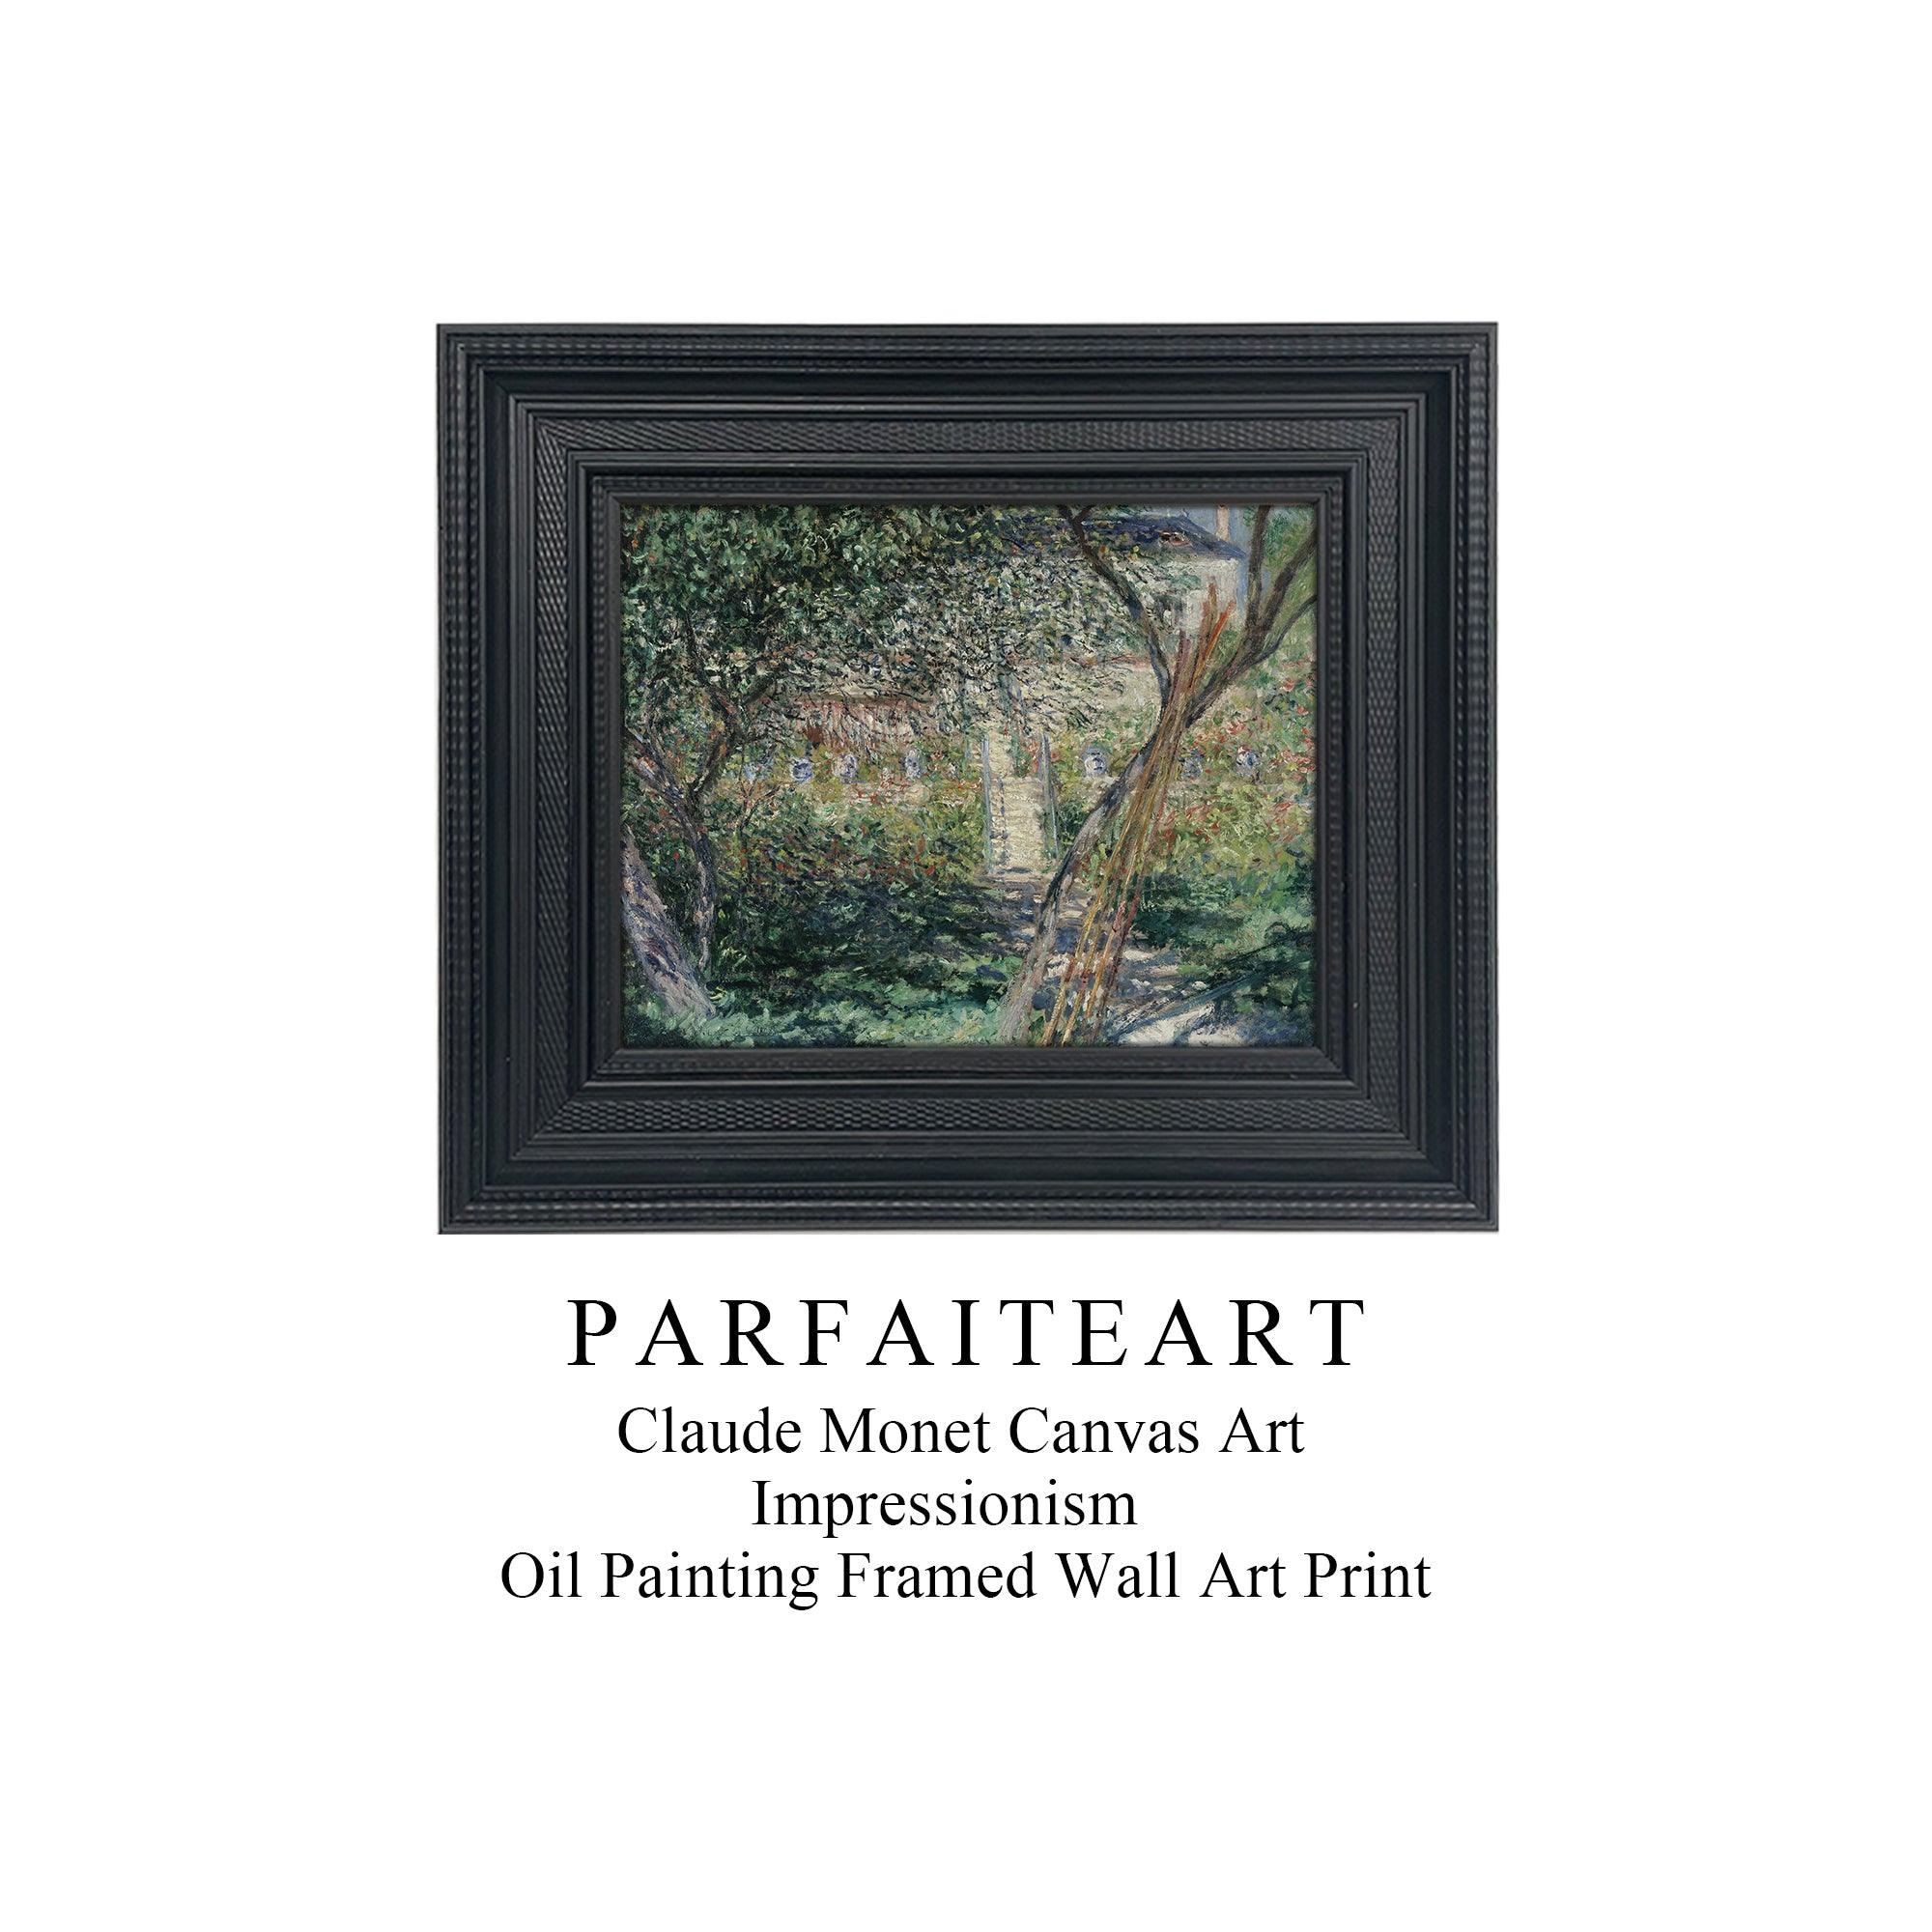 Famous Painting Print，Claude Monet，Moody Wall Decor，Black Vintage Frame,Solid Wood,High-Quality Waterproof Decorative Canvas Art， Hotel Aisle Living Room Home Decor Art 18x15 inches 1 Black